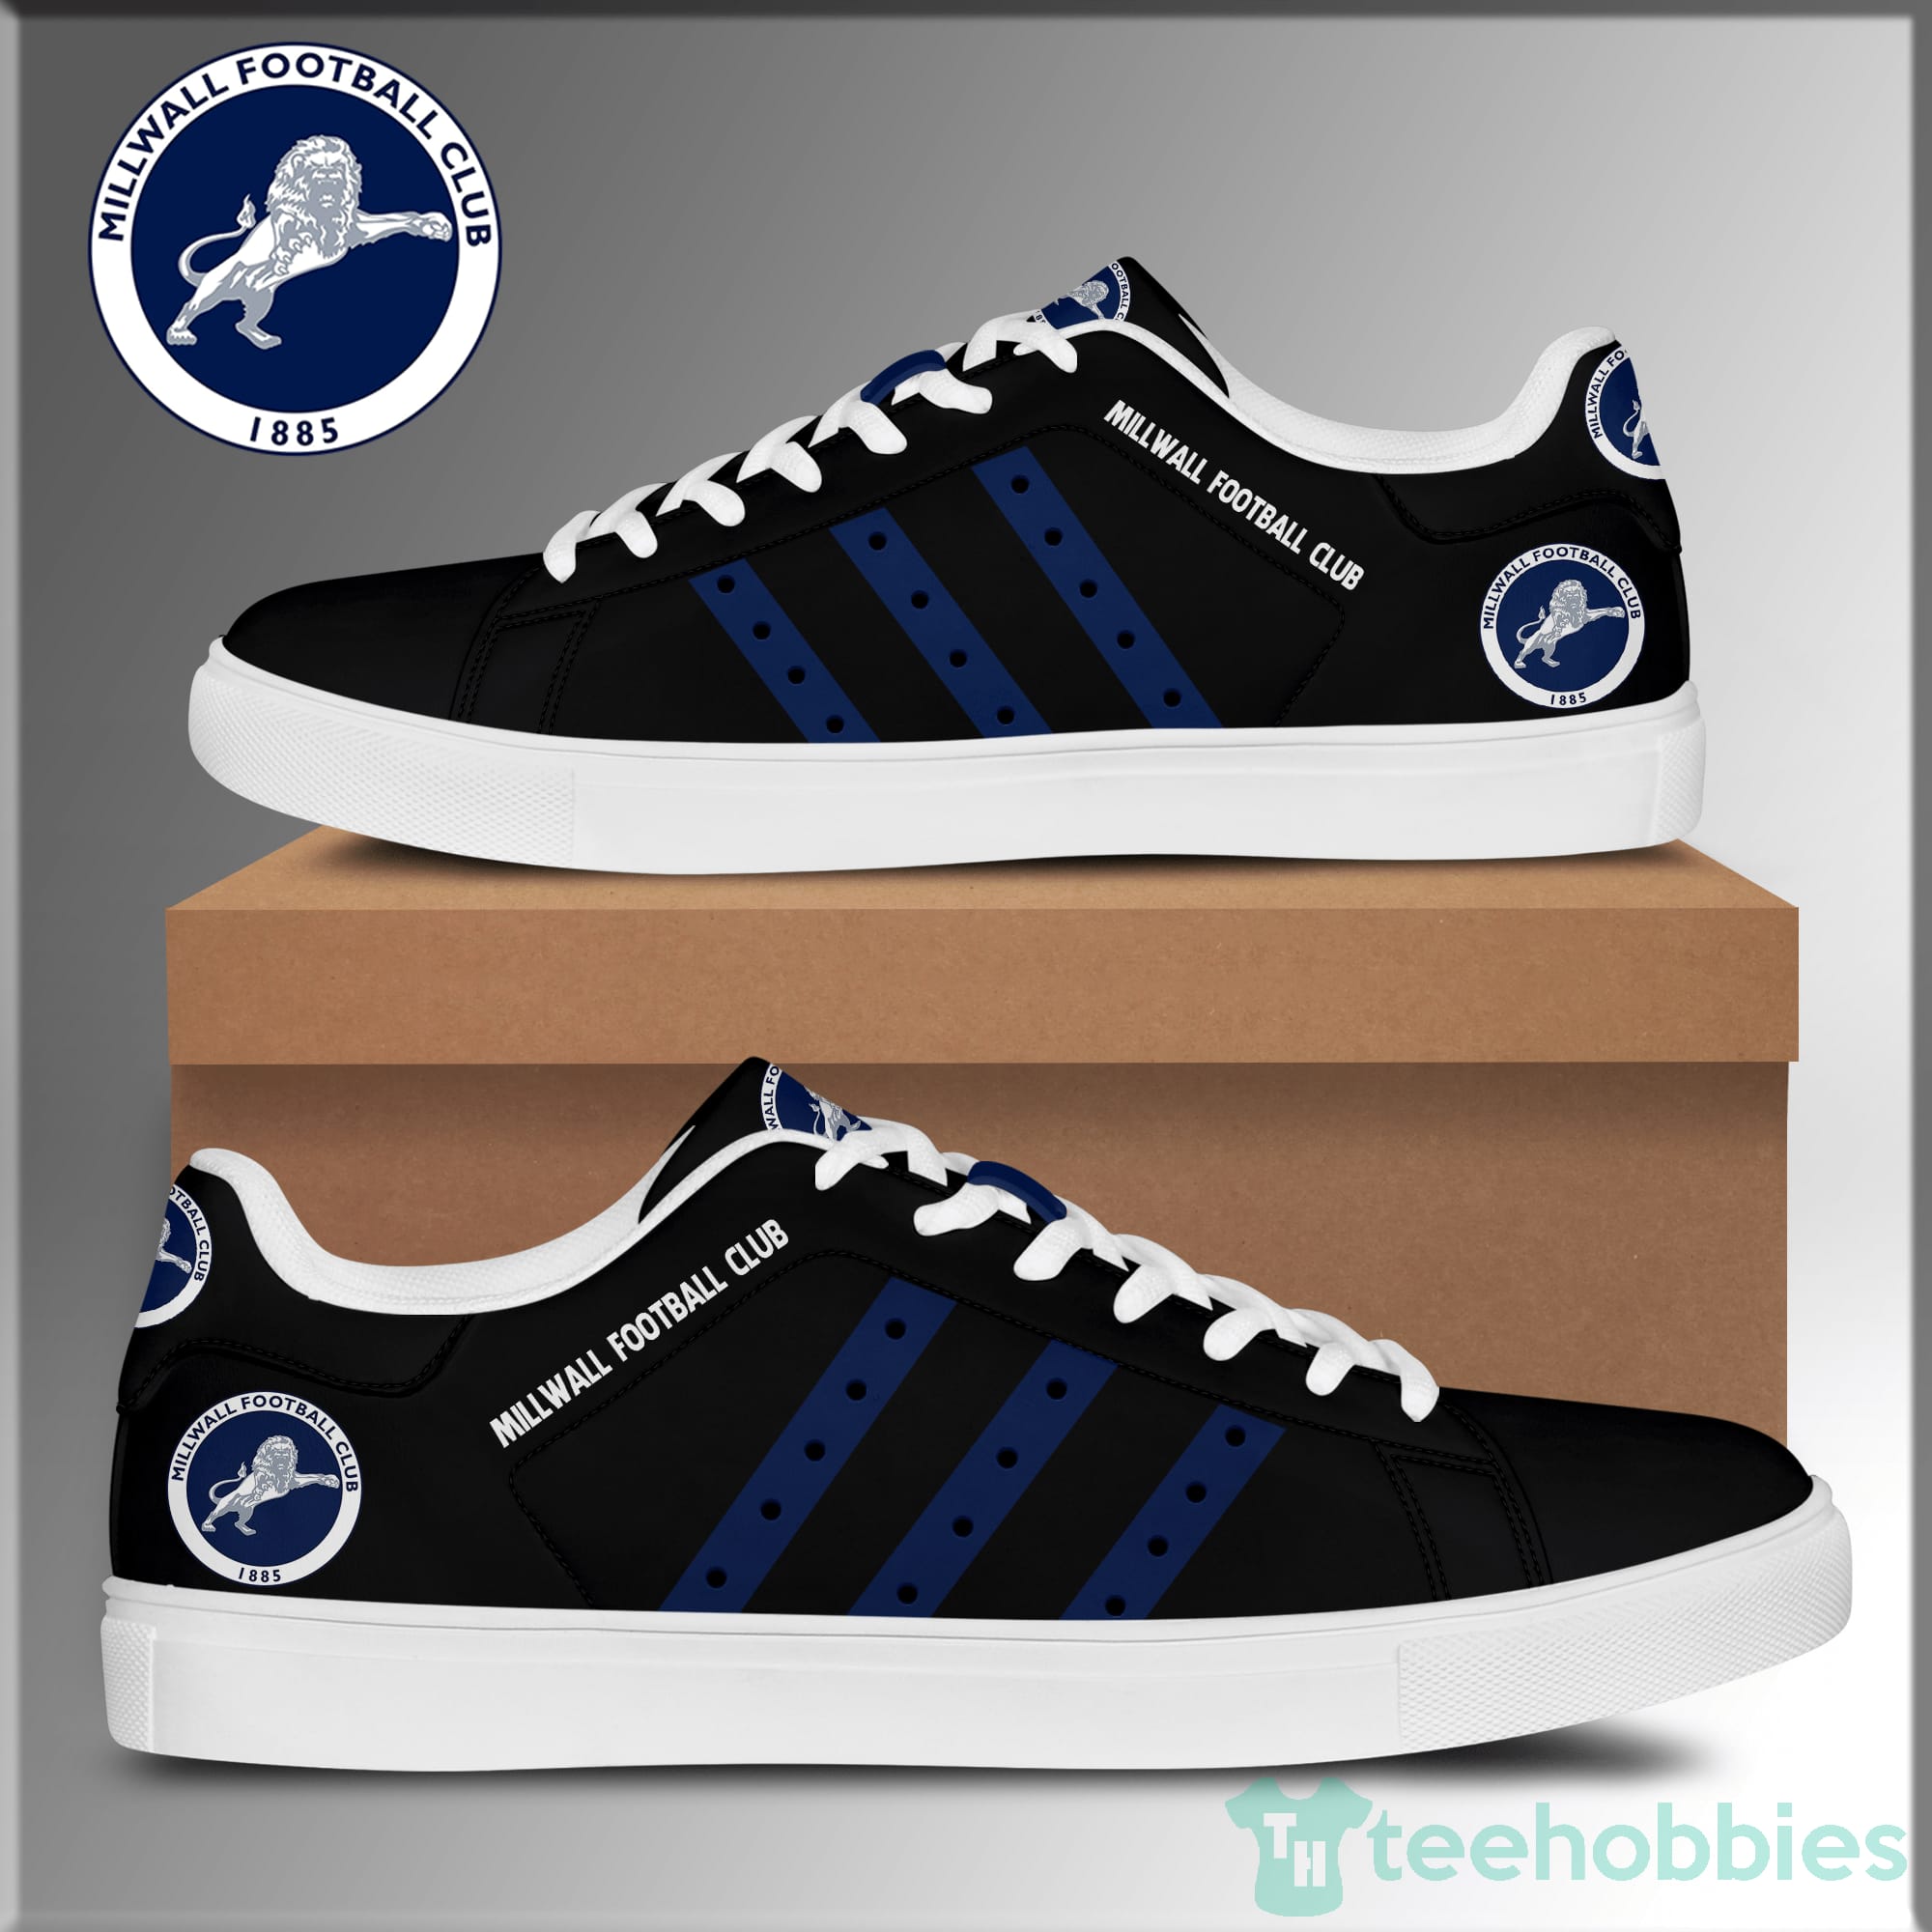 Millwall Football Club Low Top Skate Shoes Product photo 1